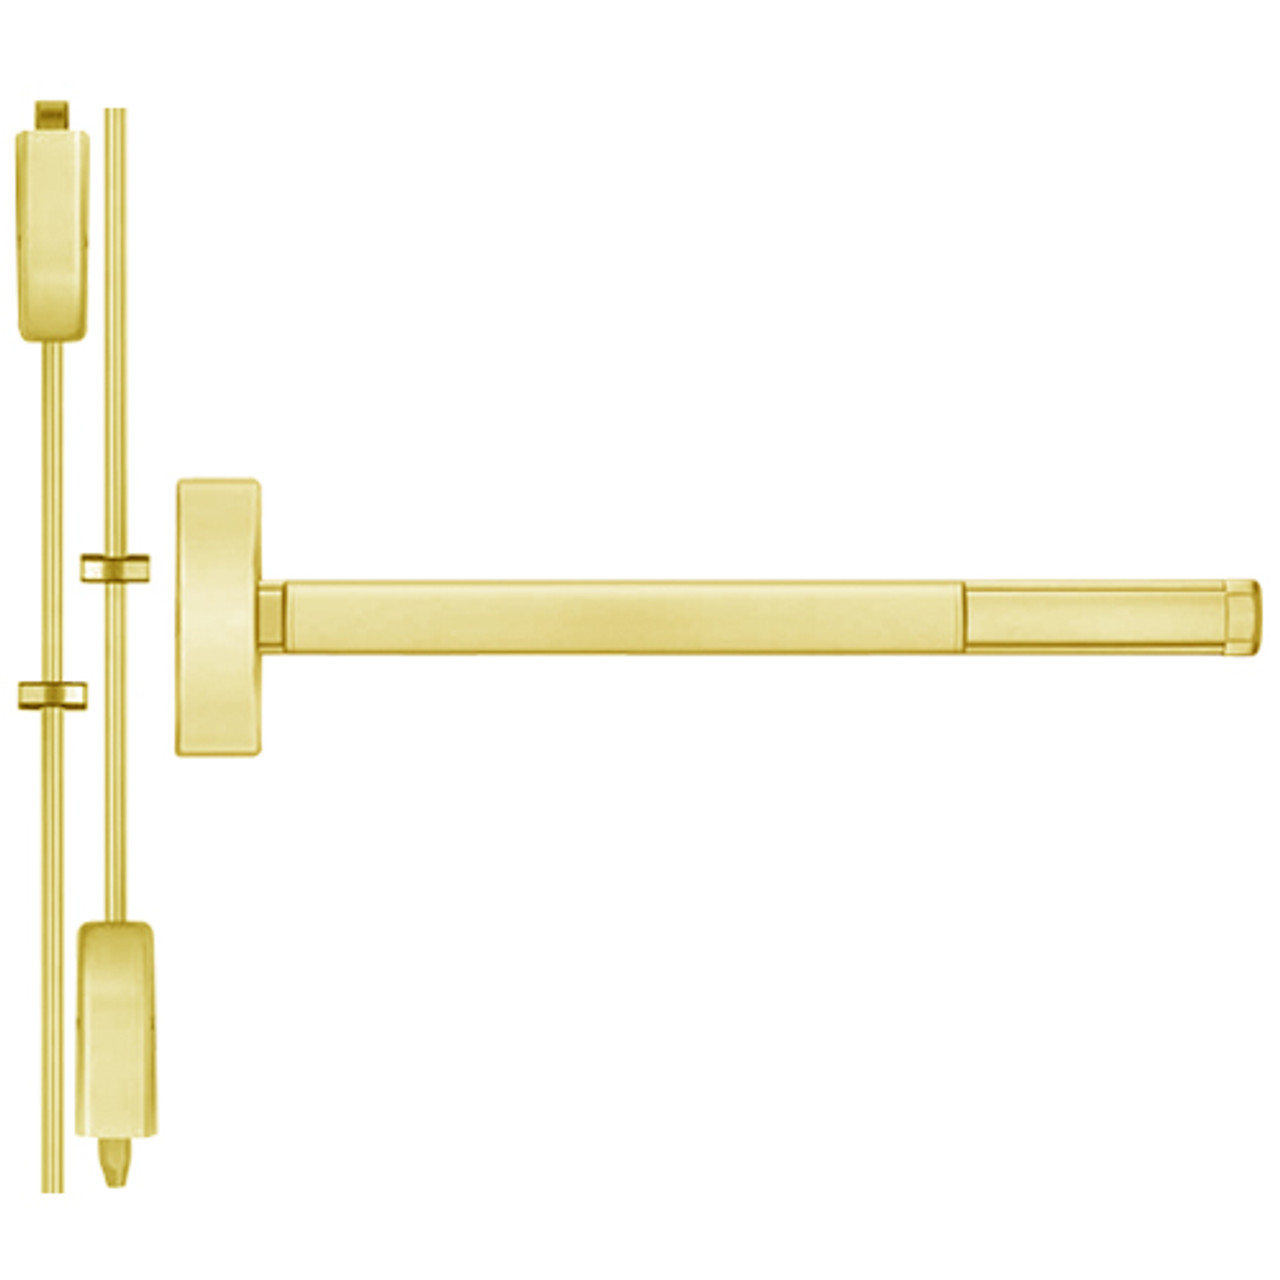 ELRFL2203-605-36 PHI 2200 Series Apex Surface Vertical Rod Device with Electric Latch Retraction Prepped for Key Retracts Latchbolt in Bright Brass Finish